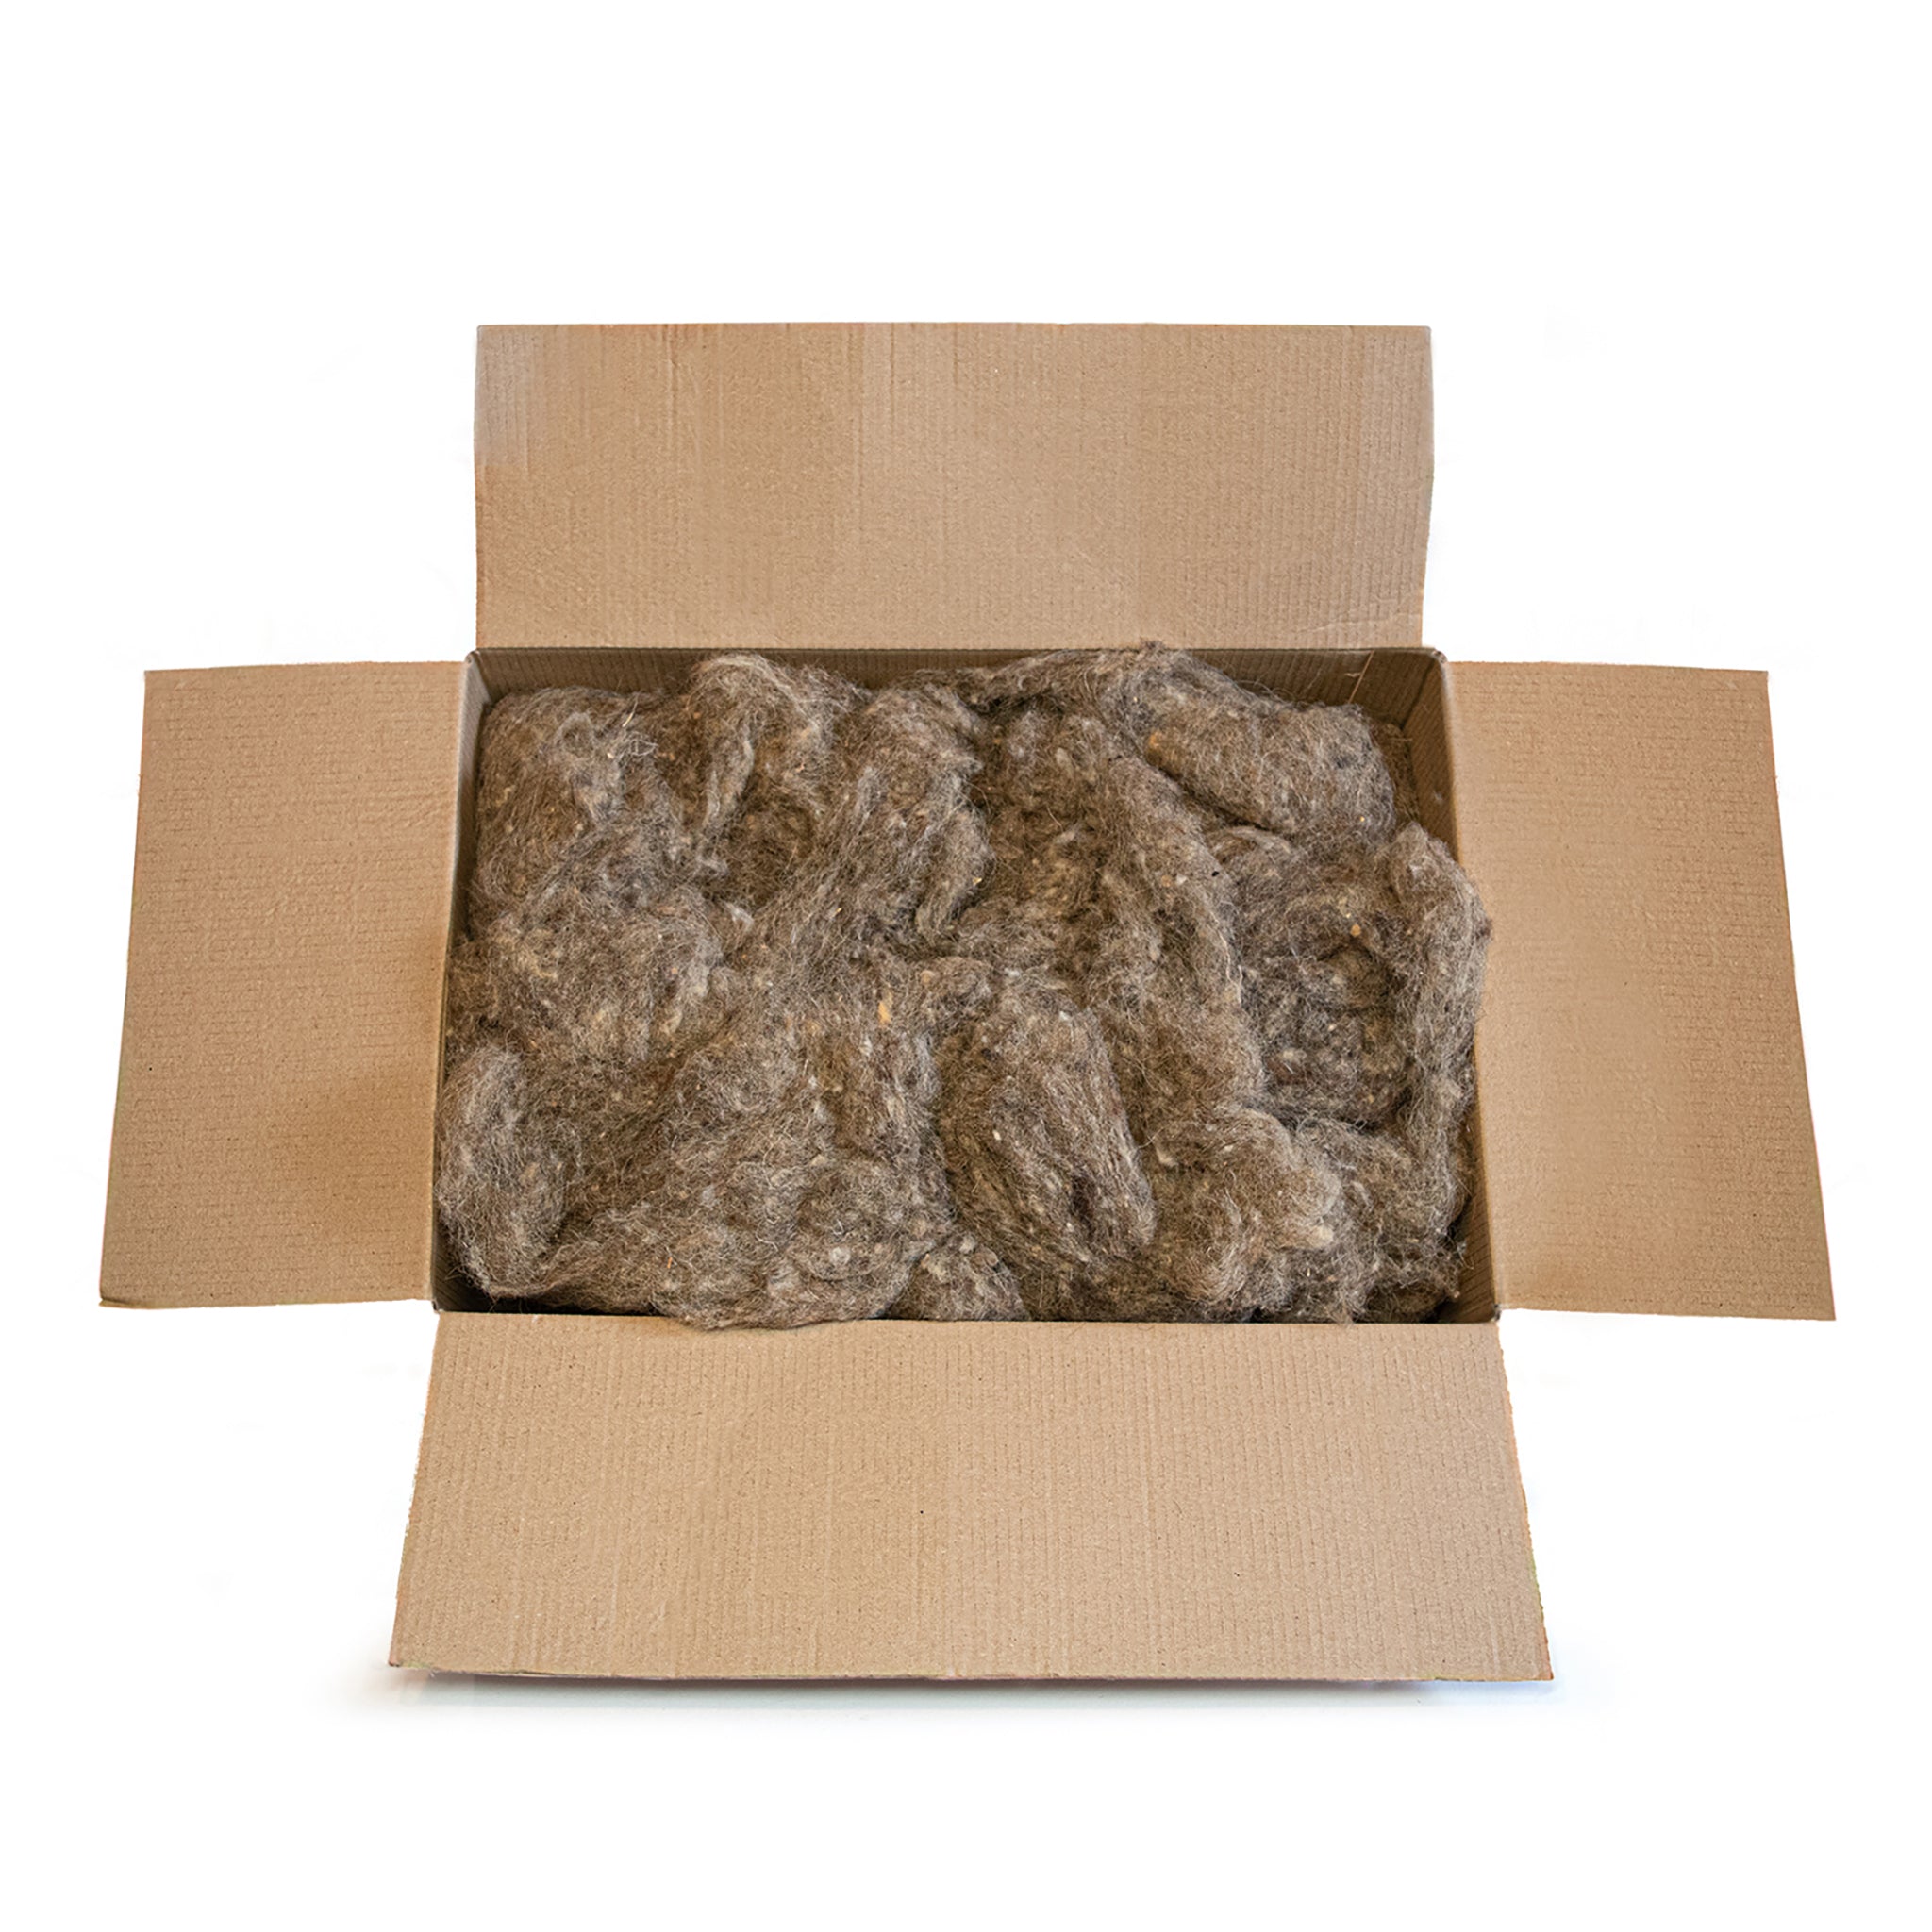 sheep wool insulation for the home